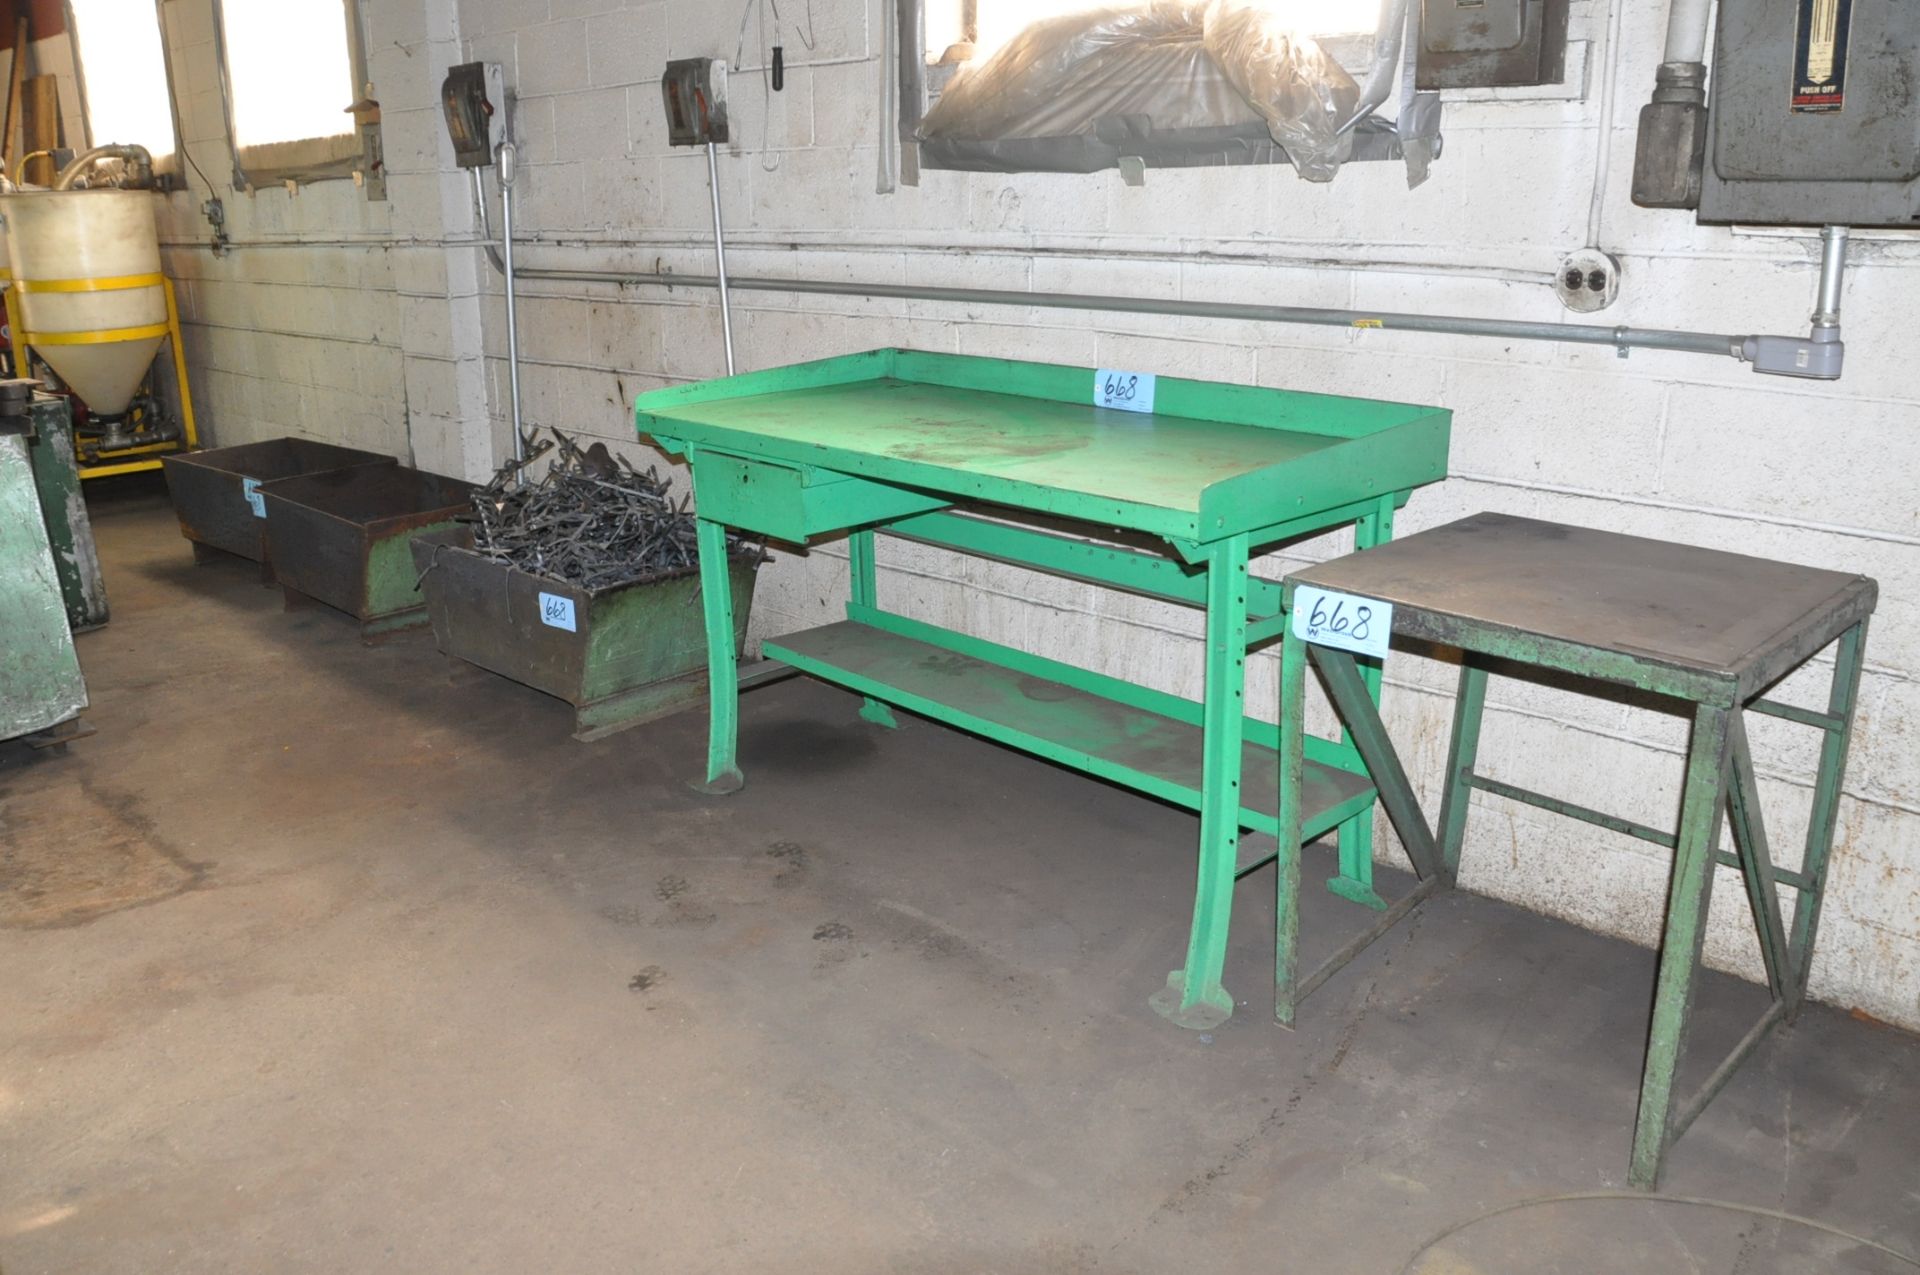 Lot-(1) 30" x 84" x 1/2" Steel Plate Topped Work Bench, (3) Steel Totes with Contents, Etc. (Bldg 2)